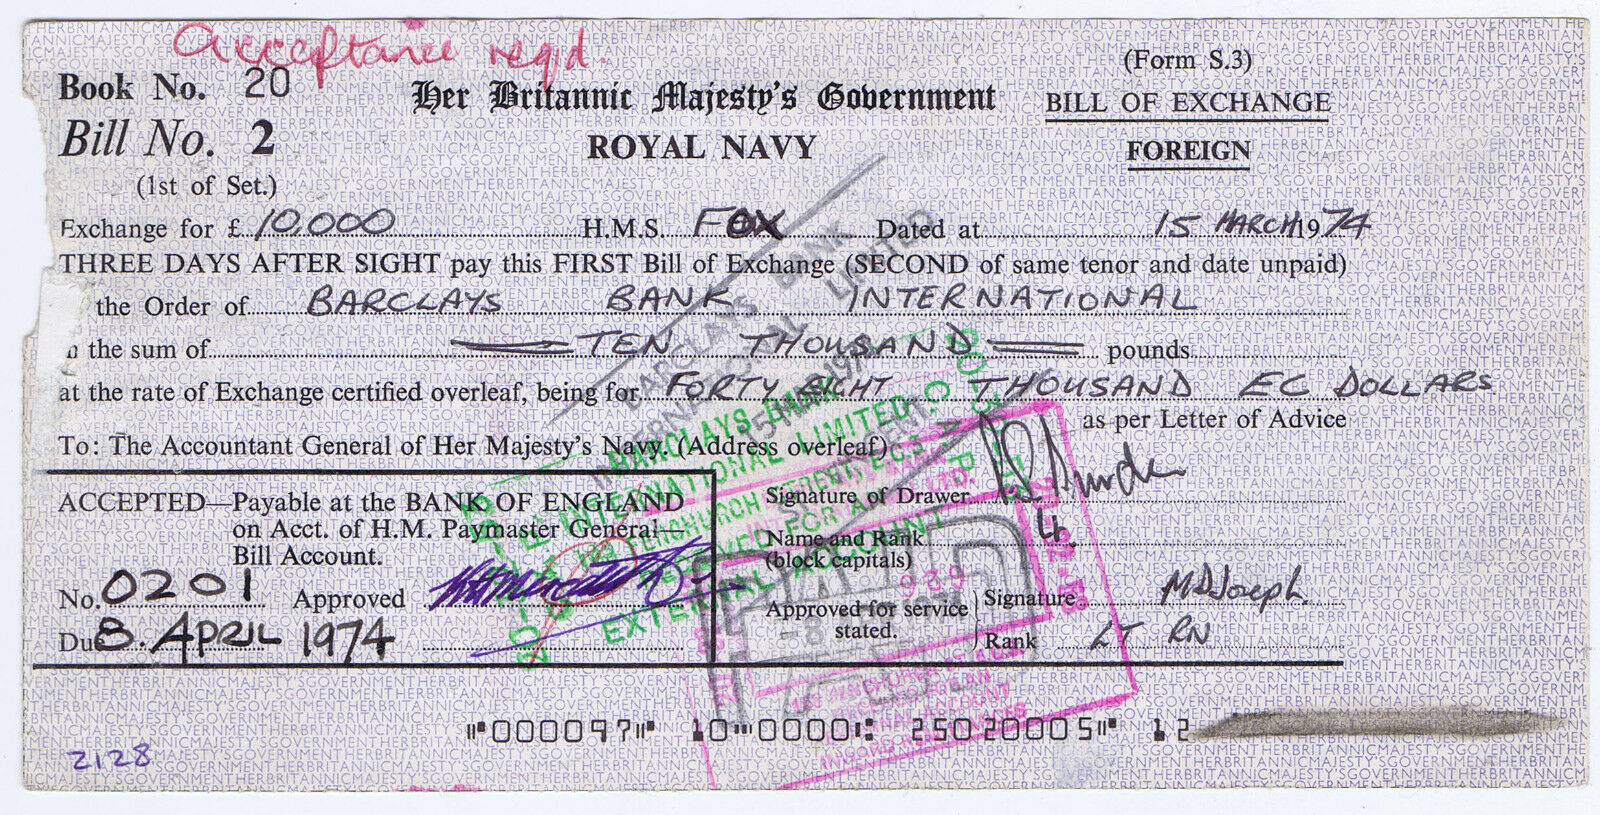 ROYAL NAVY CHECK for £ 10000 (TEN THOUSAND) H.M.S. FOX PAID in ST VINCENT 1974